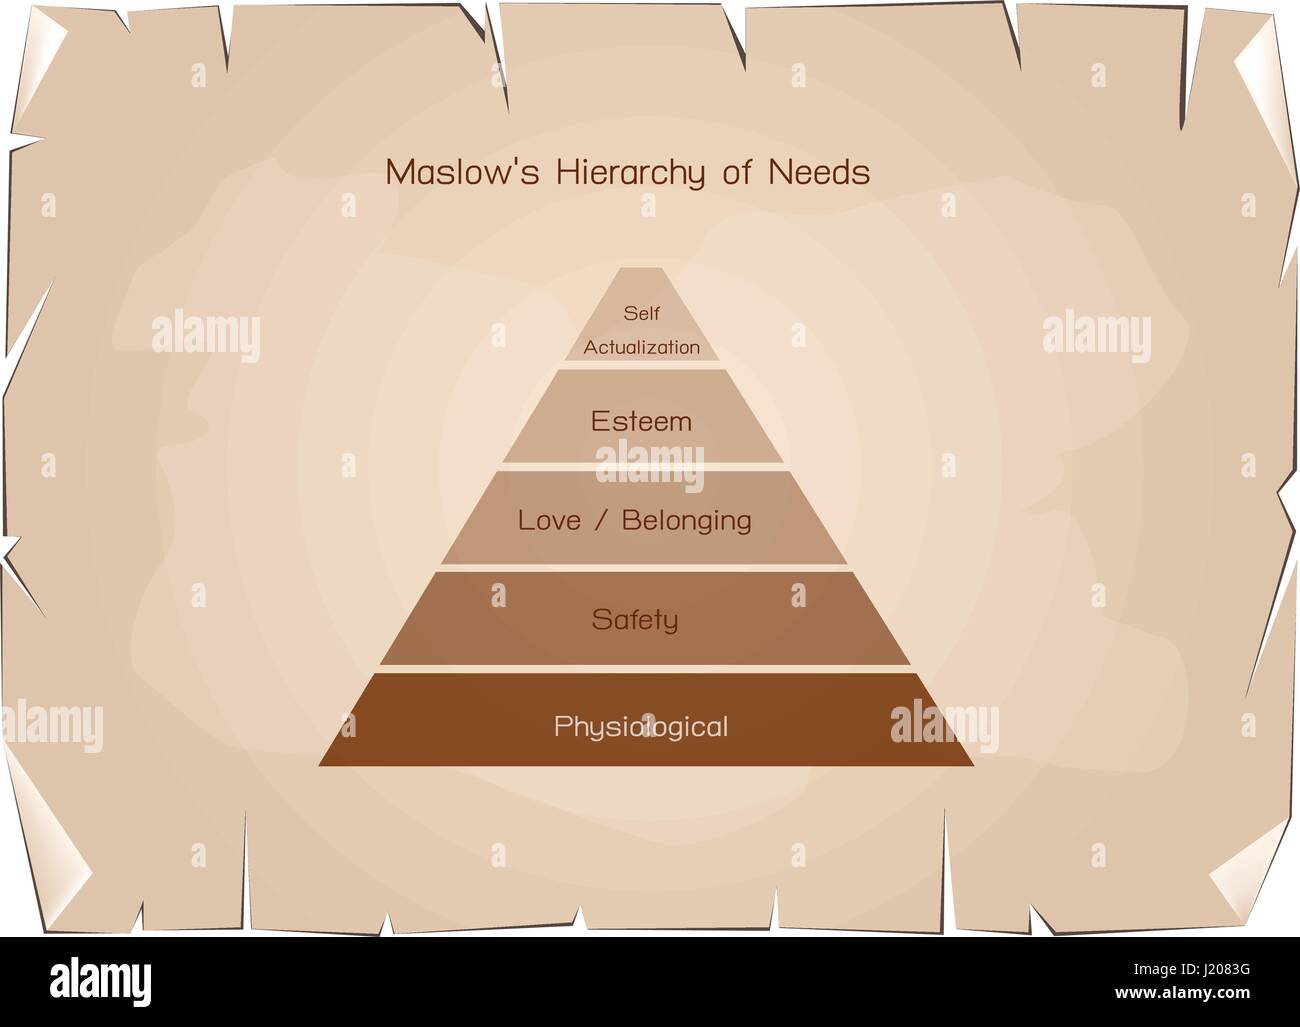 Social and Psychological Concepts, Illustration of Maslow Pyramid Chart with Five Levels Hierarchy of Needs in Human Motivation on Old Antique Vintage Stock Vector